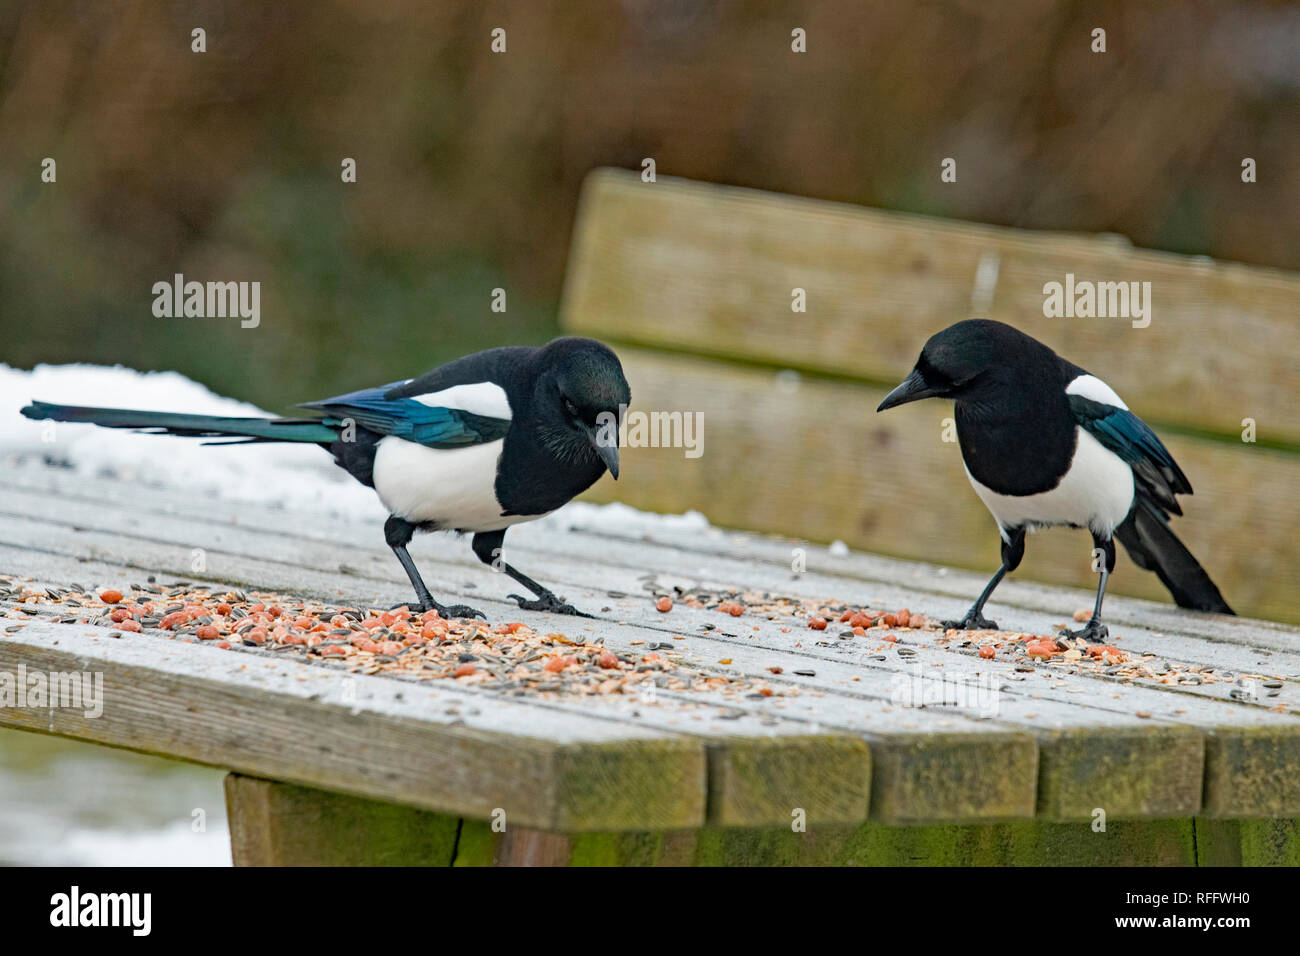 eurasian magpies, (Pica pica) Stock Photo